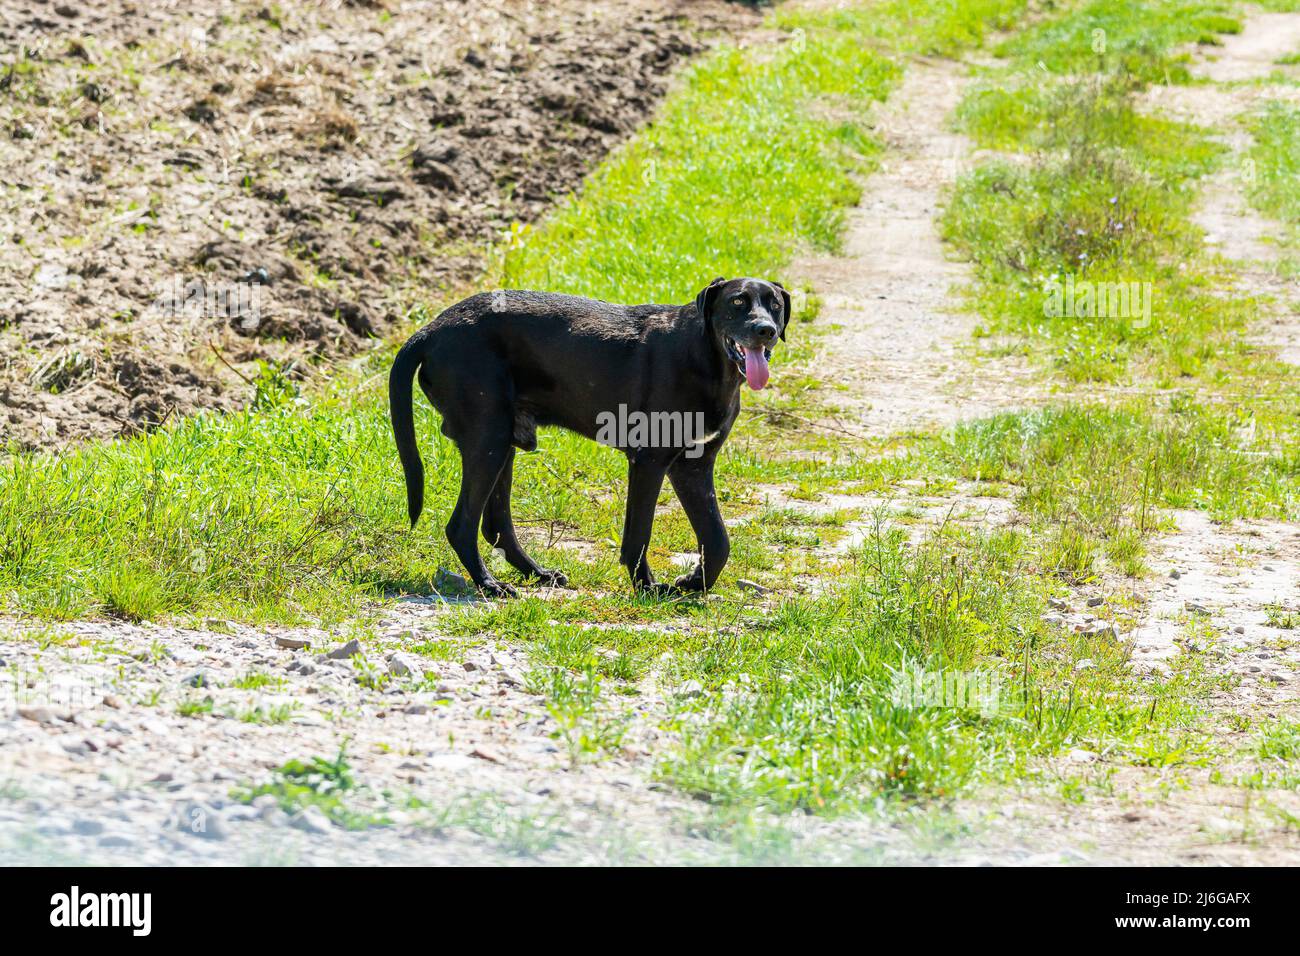 Black street dog with broken leg without veterinary care Stock Photo